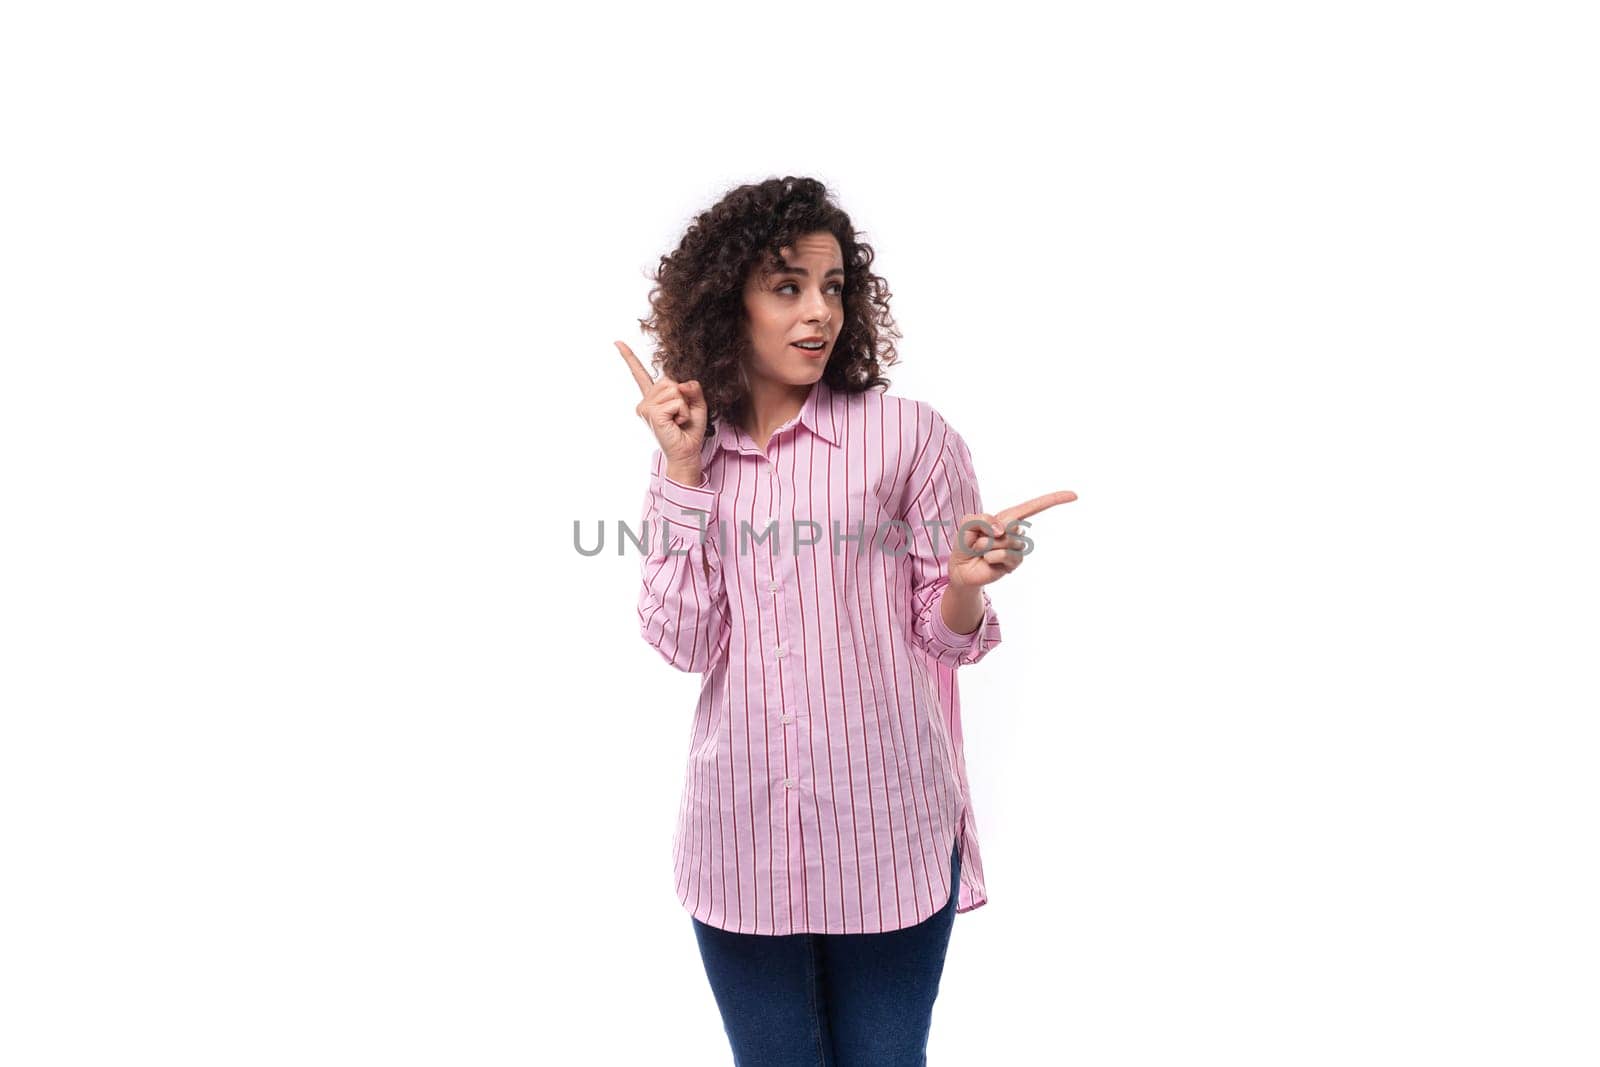 young authentic caucasian woman with curly black hair dressed in a pink shirt on a white background with copy space by TRMK